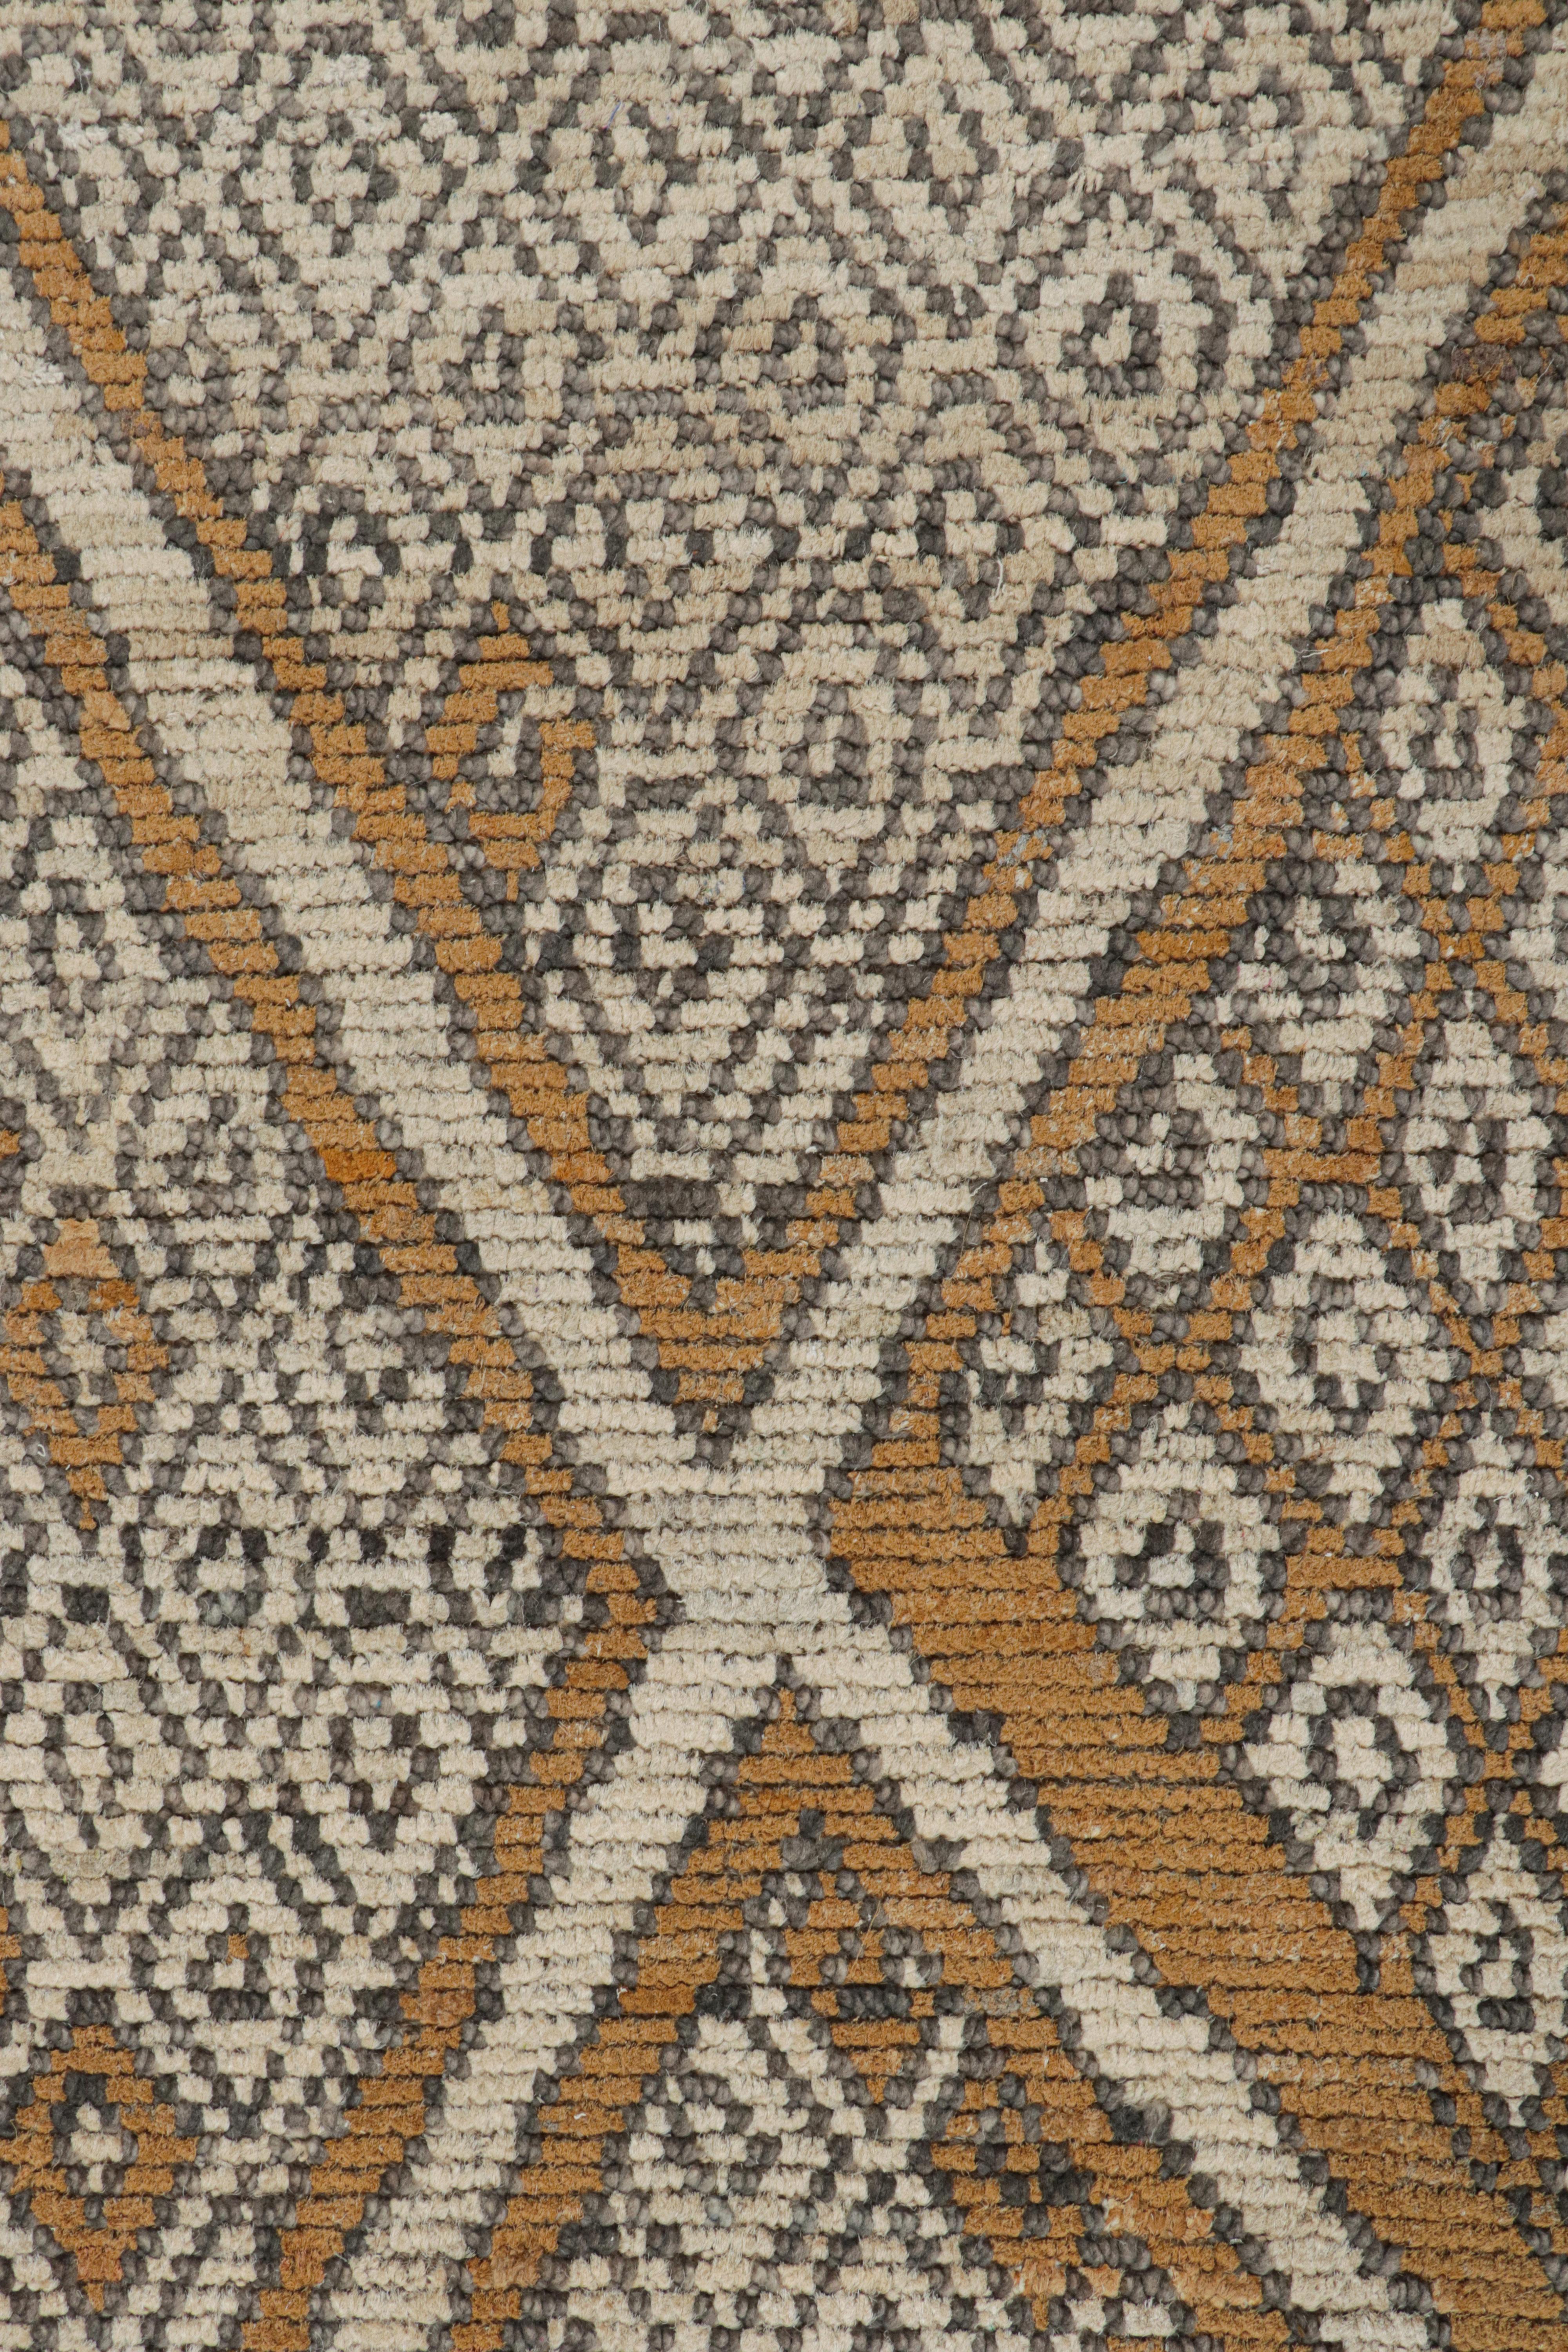 Rug & Kilim’s Moroccan Style Rug in Auburn Orange and White Diamond Patterns In New Condition For Sale In Long Island City, NY